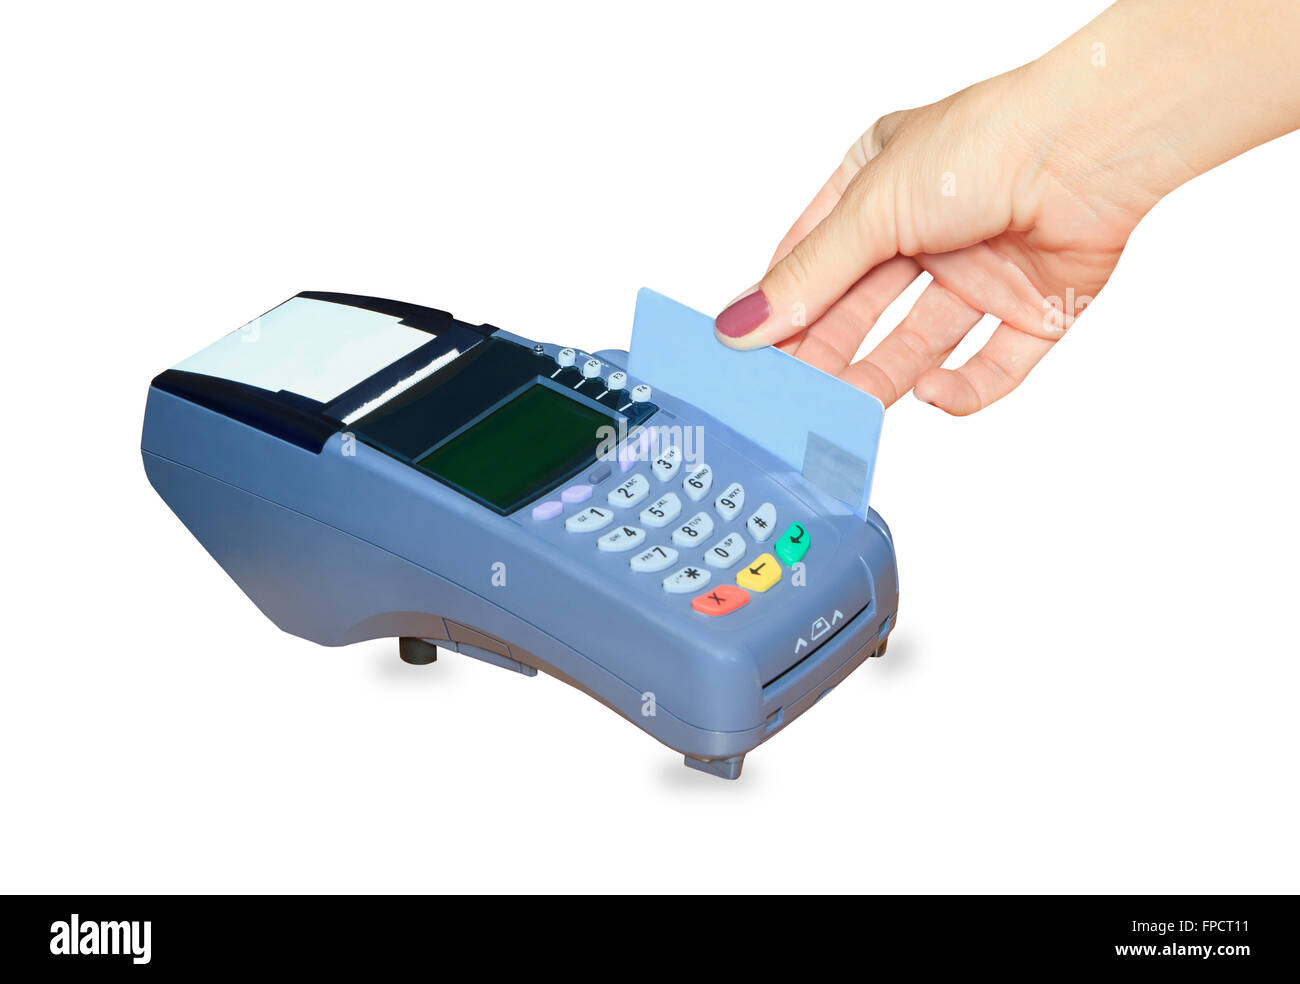 Hand swiping generic credit card on an over counter POS terminal Stock Photo